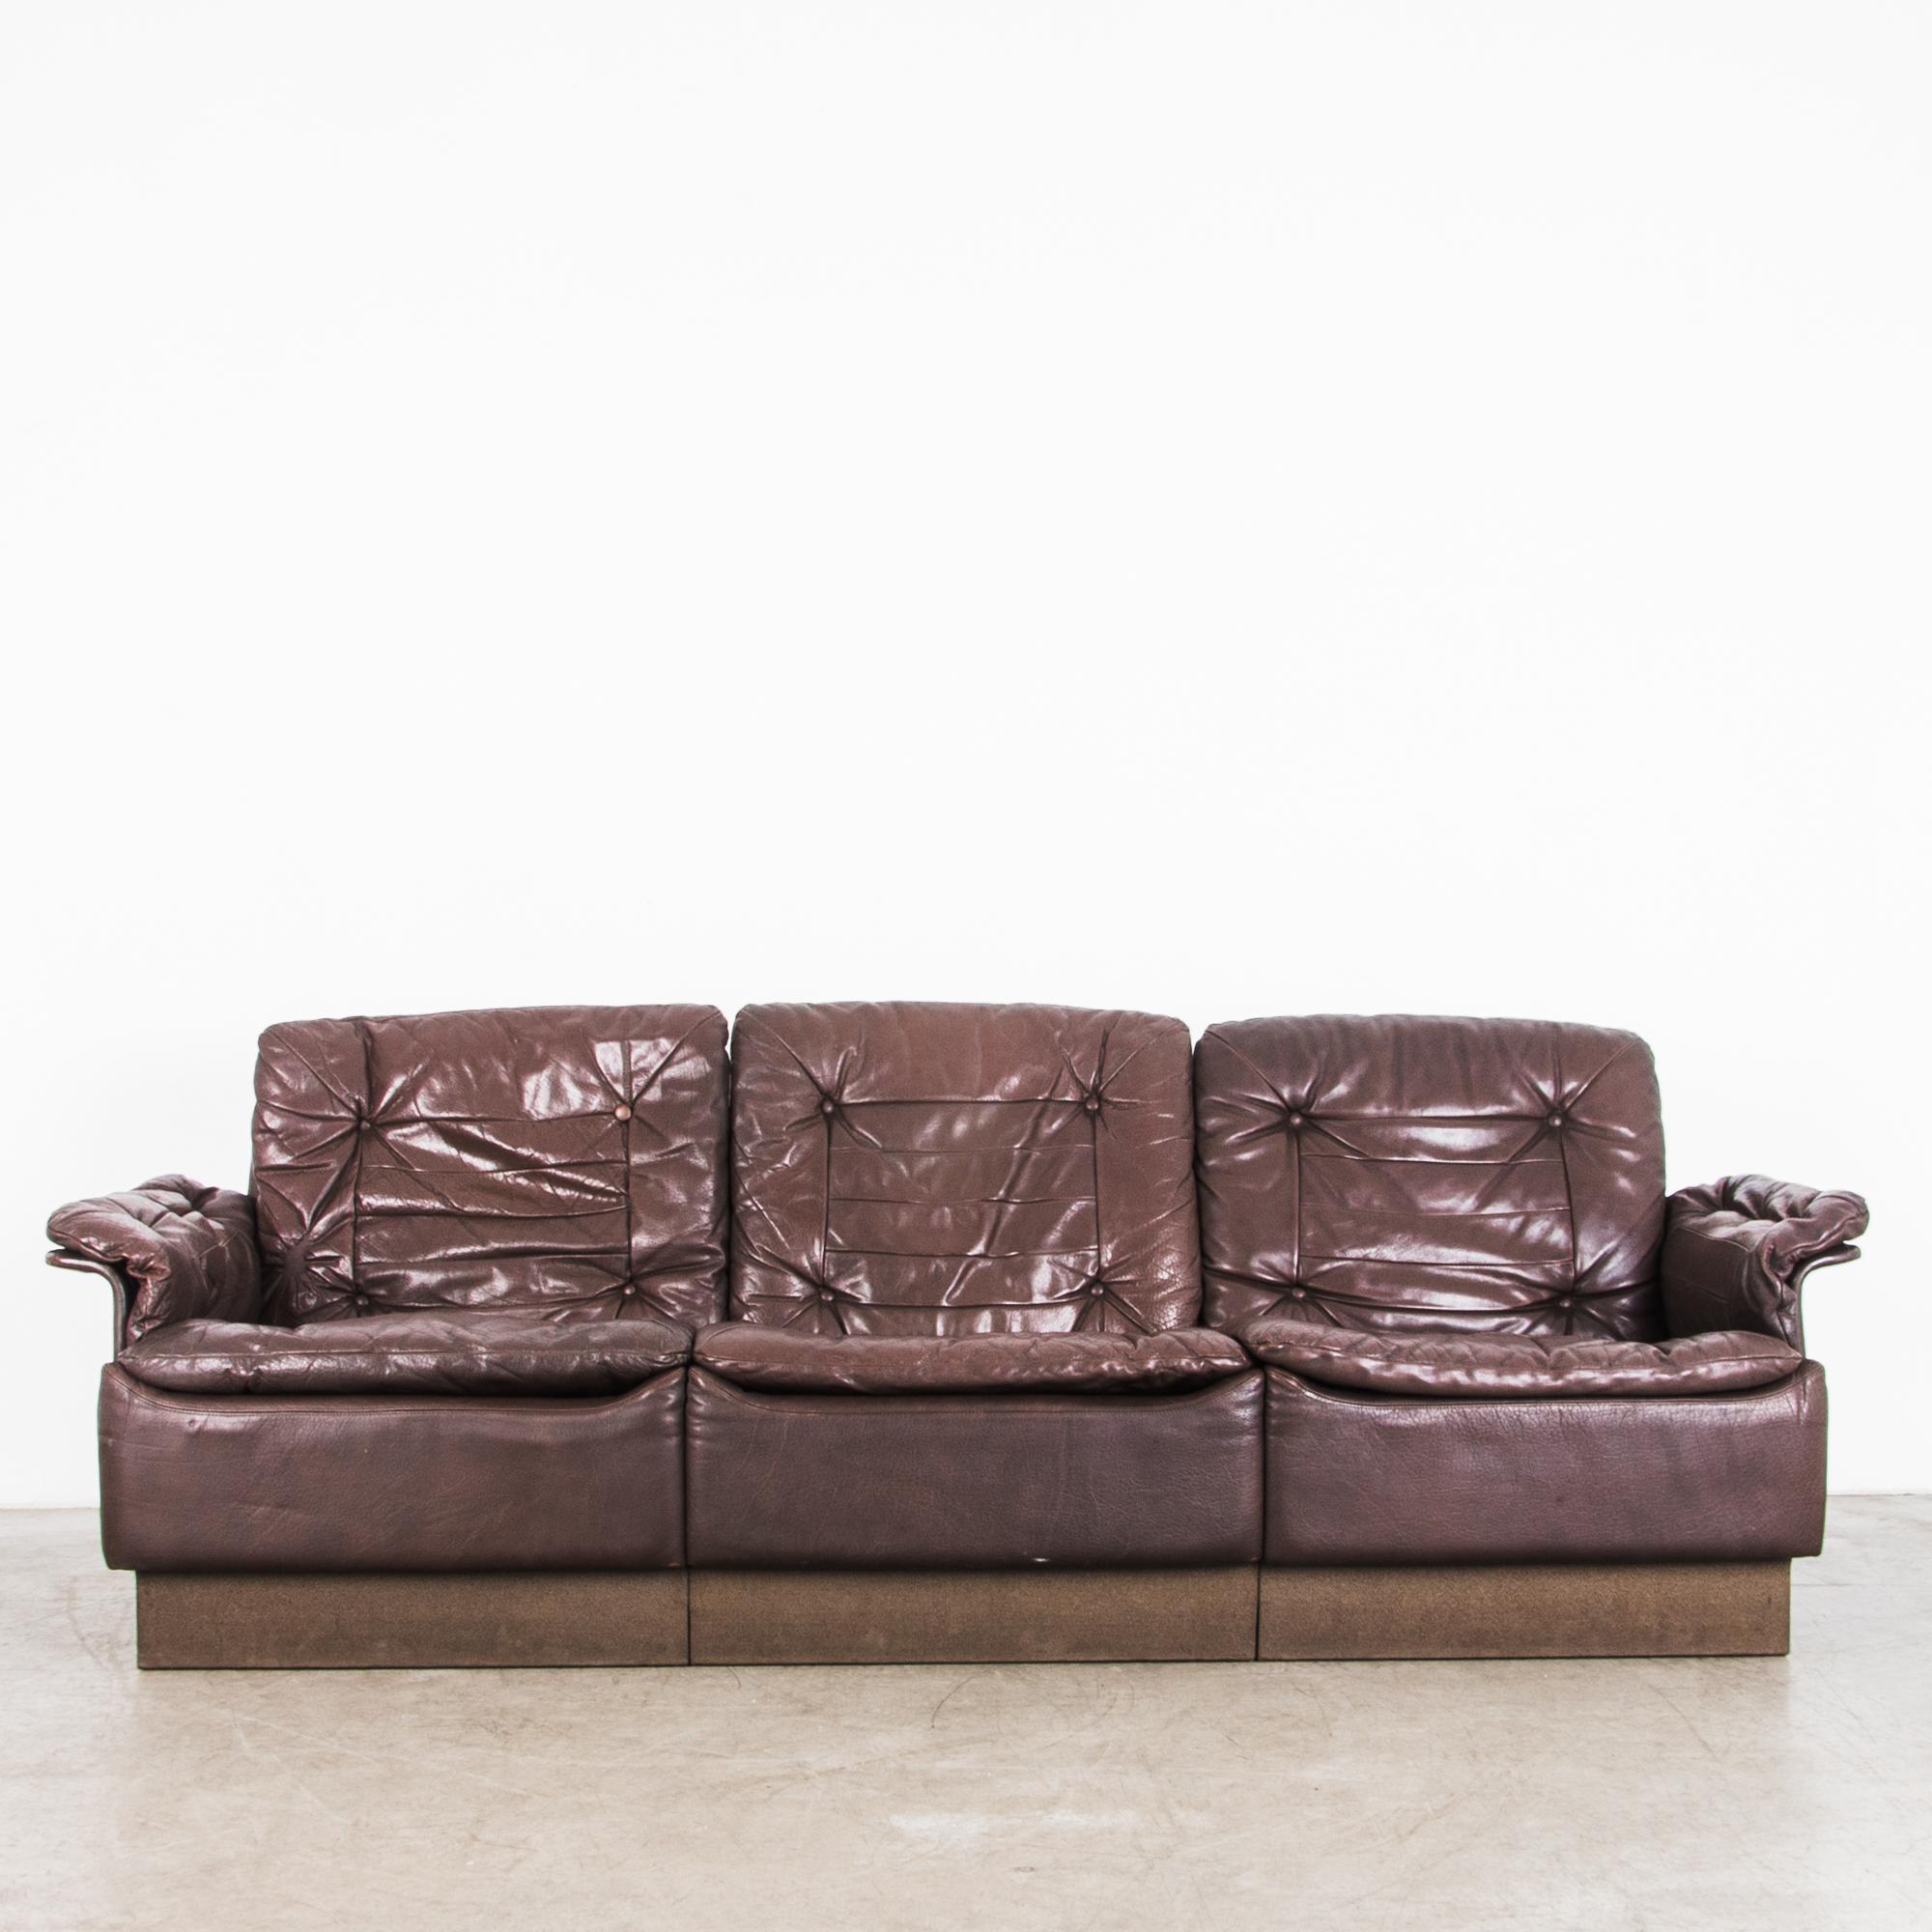 A 1970s chocolate brown leather sofa, built in Denmark. The buttoned sofa cushions and arm-rests speak to classic arm-chair design, while clean curves and elevating platform provide a modernist silhouette. The rich color, fine quality of the leather